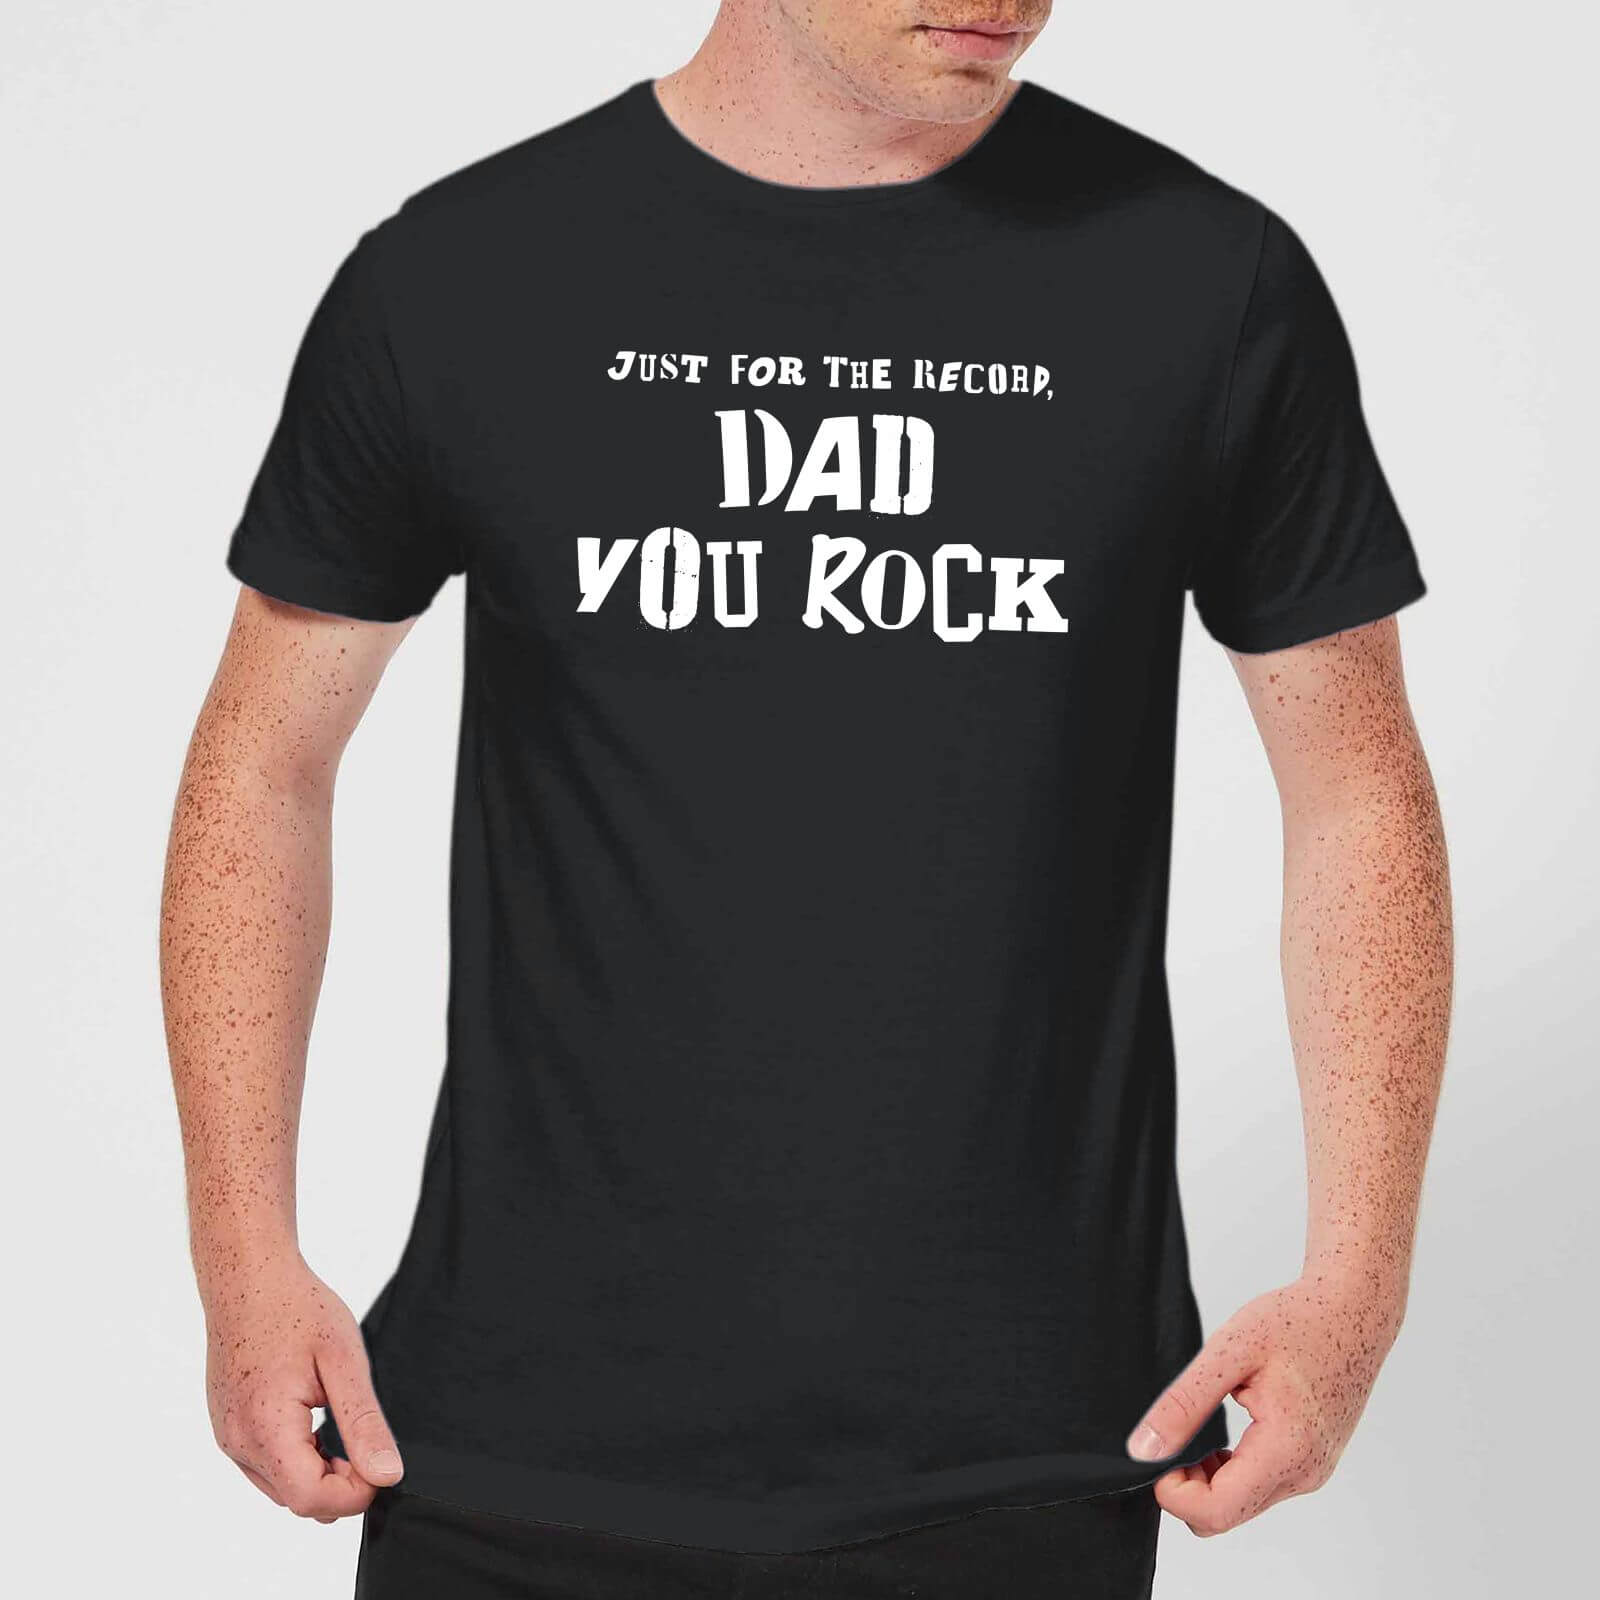 just for the record, dad you rock men's t-shirt - black - xs - black